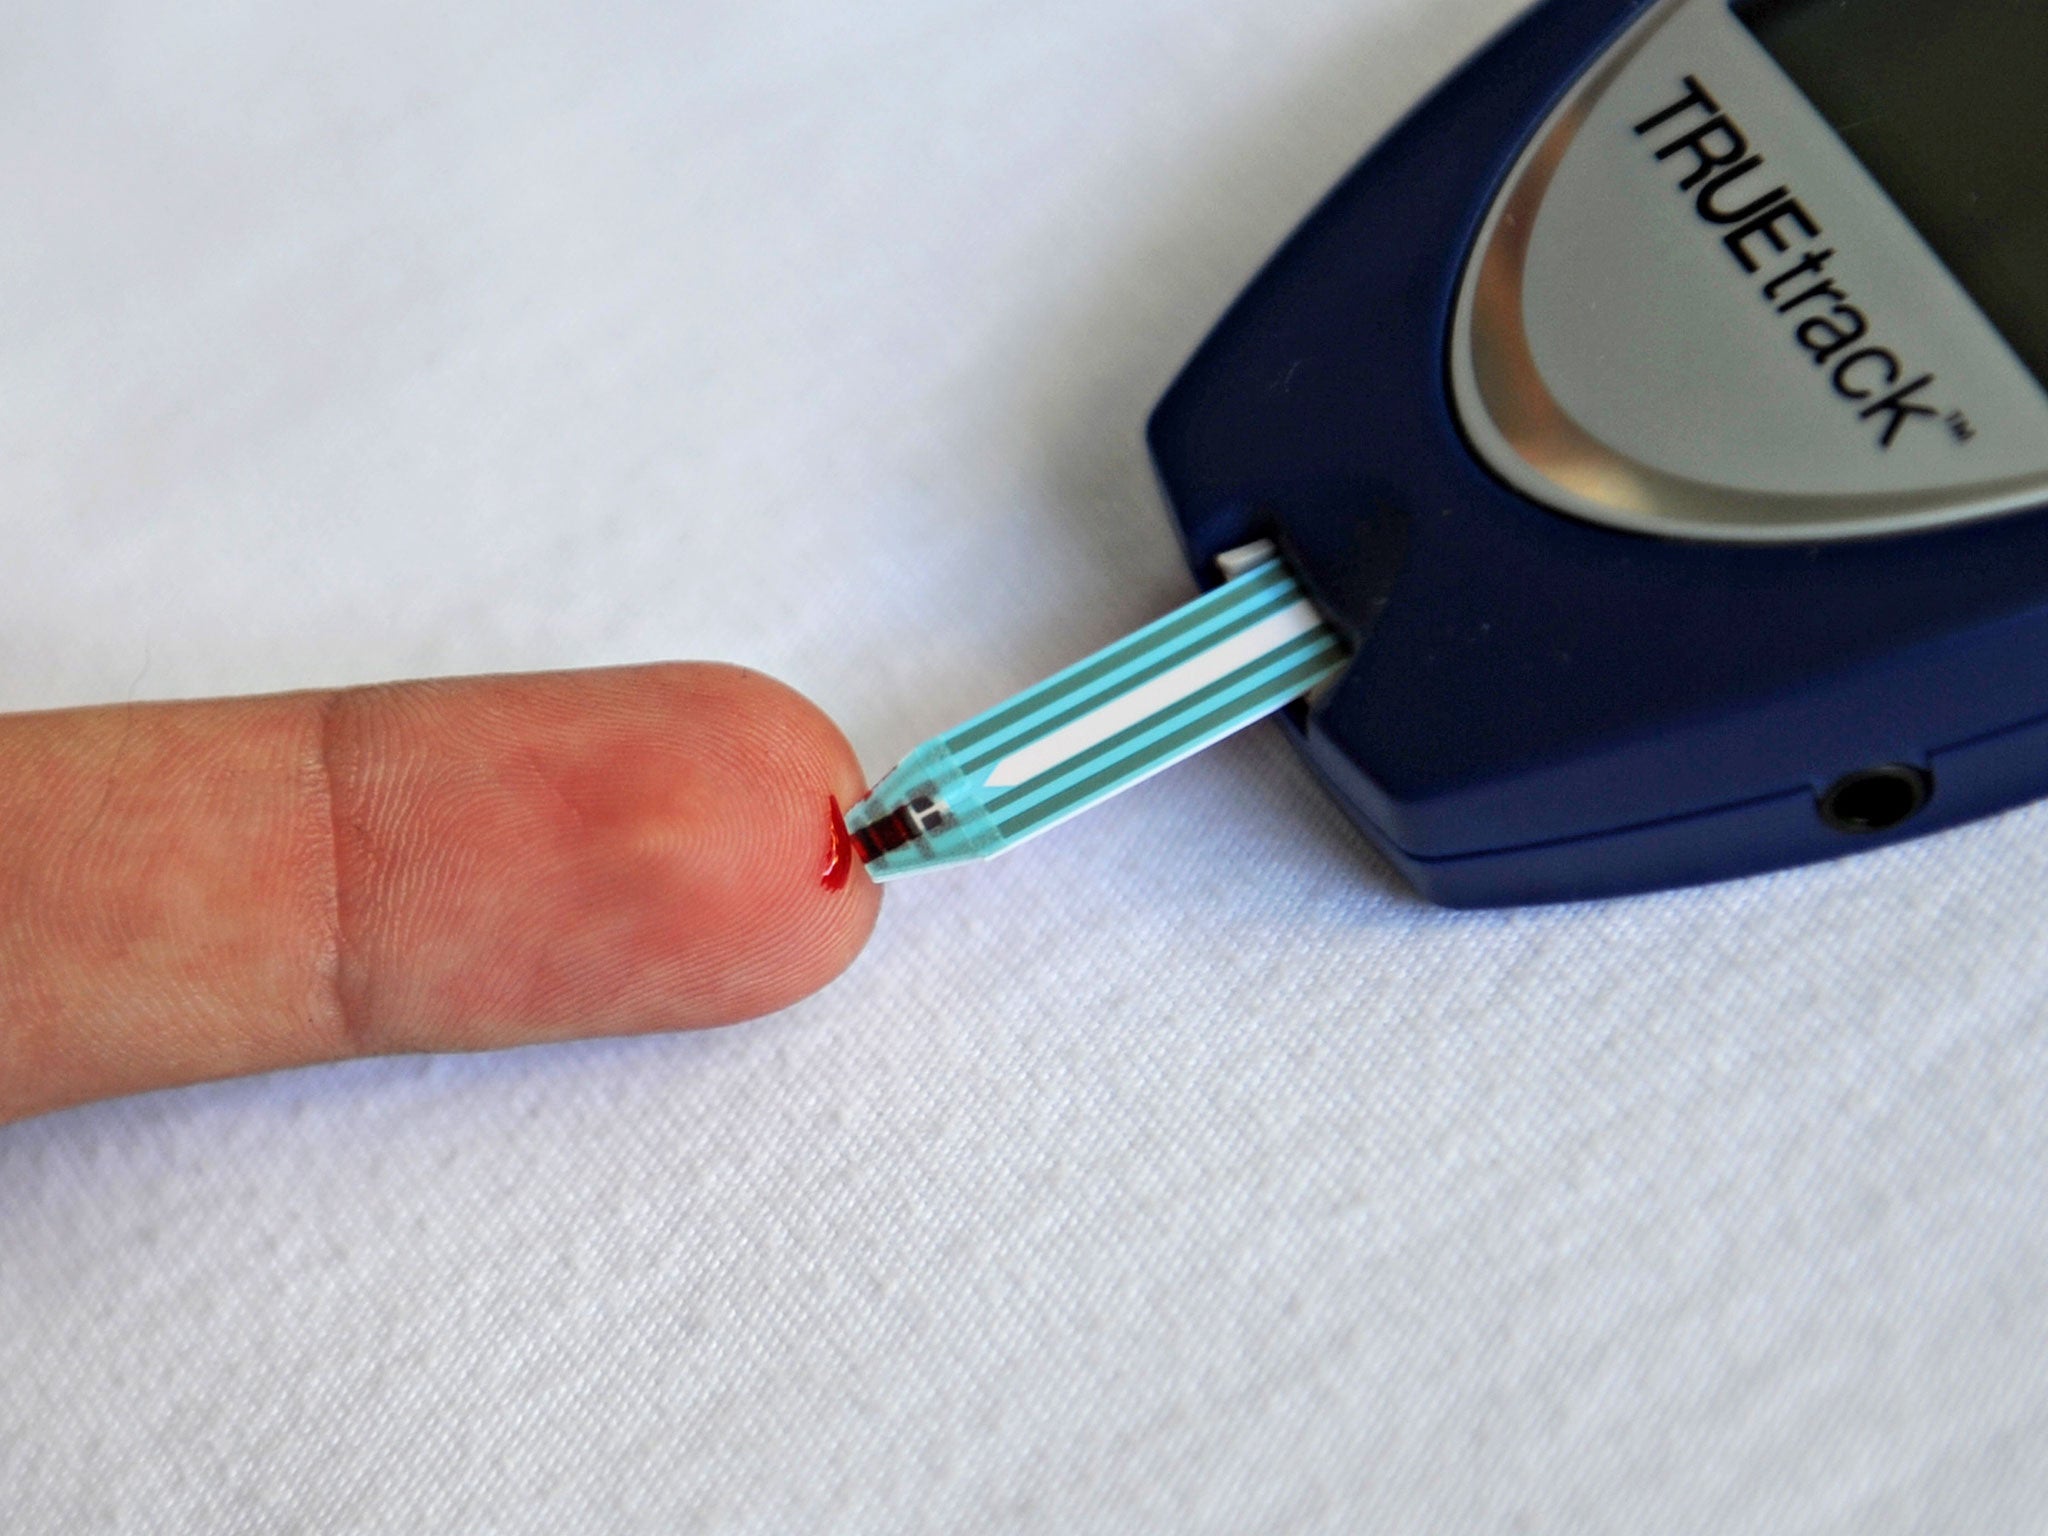 A patient with diabetes monitors his blood glucose with a glucometer